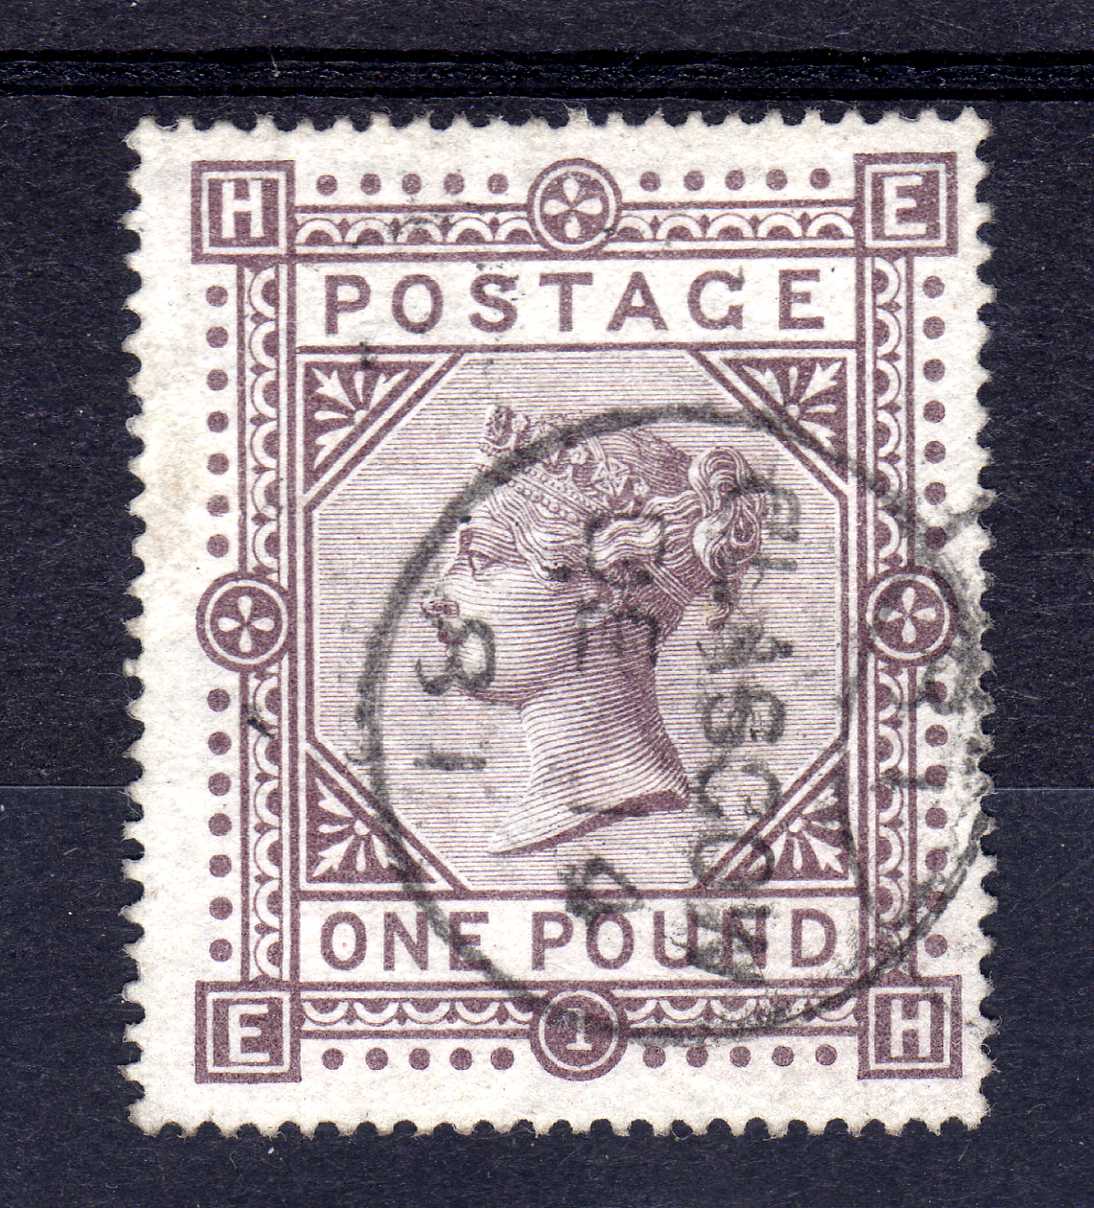 GB: 1867-83 £1 BROWN LILAC WMK MALTESE CROSS USED CANCELLED NEAT 1881 GLASGOW CDS,